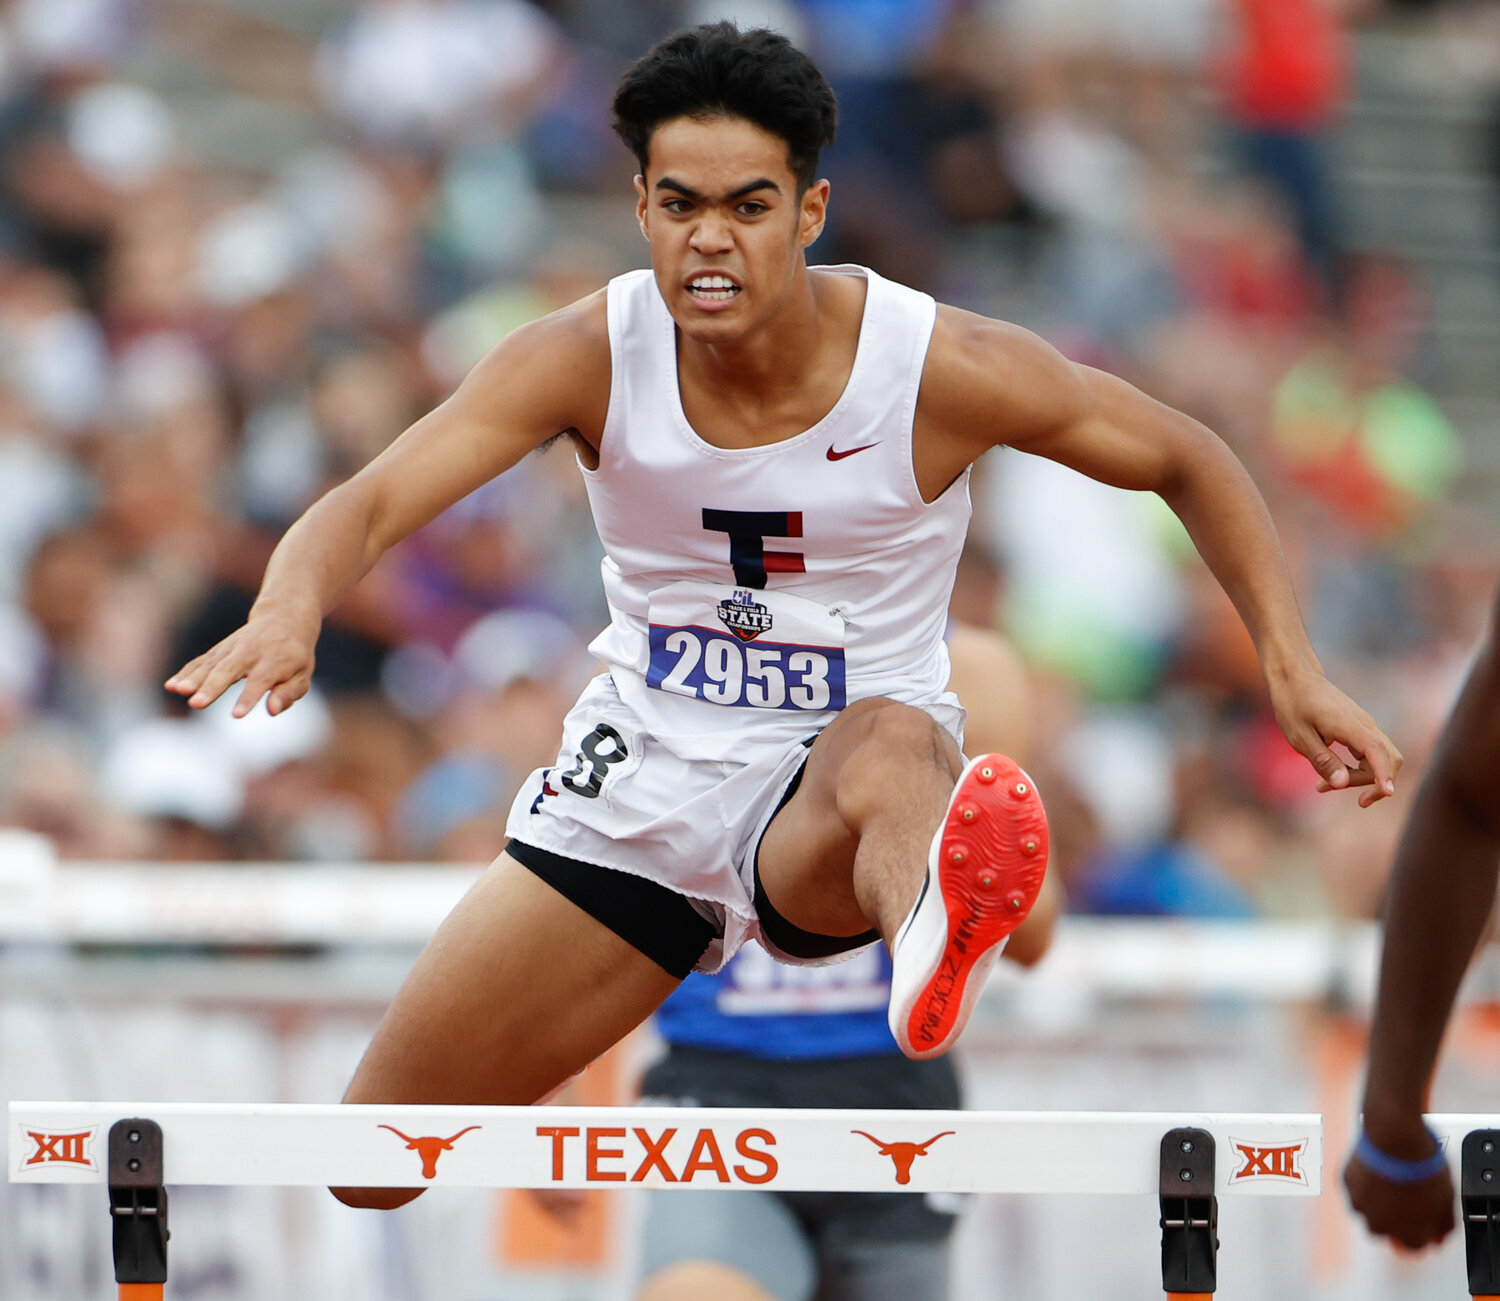 Jayden Keys of Tompkins High School (2953) competes in the the Class 6A boys 300-meter hurdles, winning the bronze medal, during the UIL State Track and Field Meet on Saturday, May 13, 2023 in Austin.